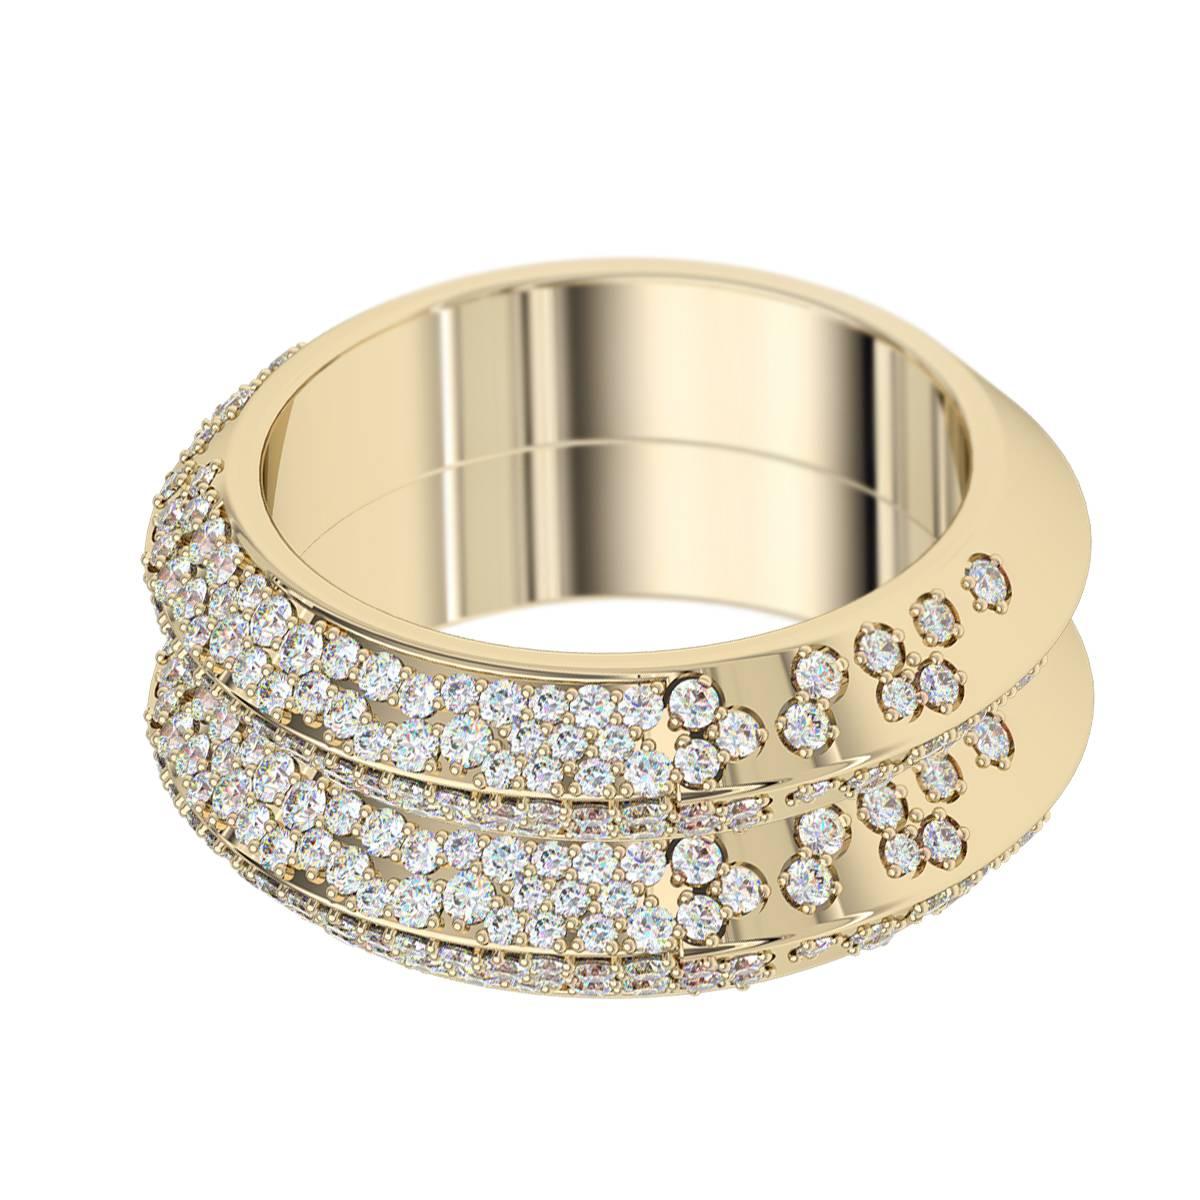 This elegant diamond pave eternity ring is handcrafted in Sydney in 18 karat yellow gold, and set with 1.6 carats of top quality diamonds. The knife edge design of the double band is contemporary and timeless. This beautiful ring would make a superb